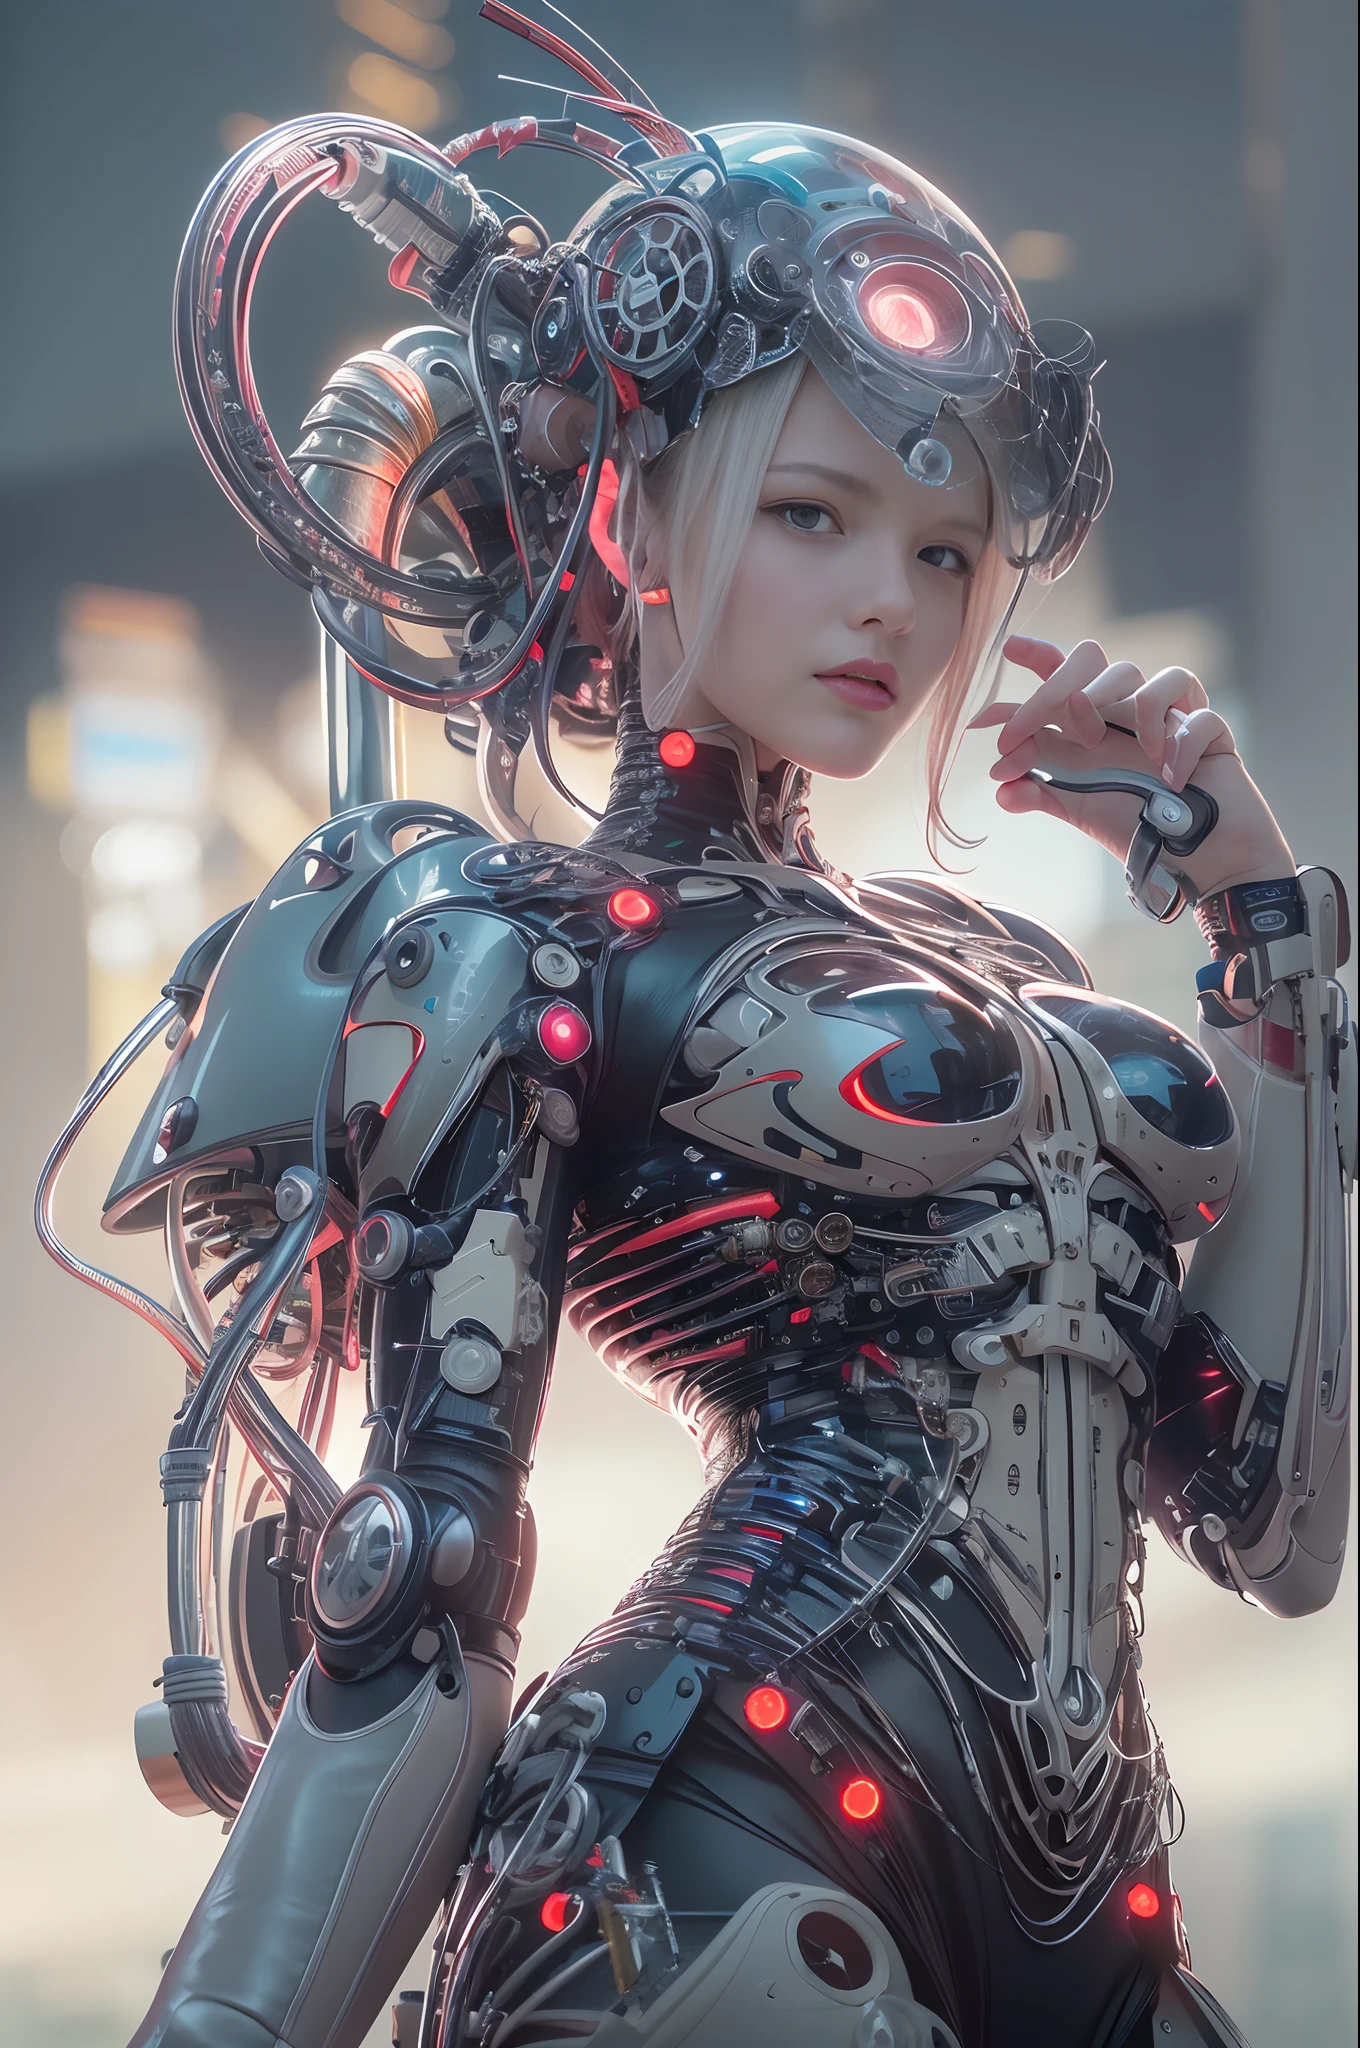 of the highest quality, masutepiece, Ultra High Resolution, ((Photorealistic: 1.4), Raw photo, 1 Cyberpunk Android Girl, Glossy skin, (super realistic details)), Mechanical limbs, Tubes connected to mechanical parts, Mechanical vertebrae attached to the spine, Mechanical cervical attachment to the neck, Wires and cables connecting to the head, Evangelion, ((Ghost in the Shell)), Small glowing LED lamp, global lighting, Deep Shadows, Octane Rendering, 8K, ultrasharp, Metal, Intricate decoration details, Baroque style details, high intricate detailed, Realistic light, Trends in CG, Facing the camera, neon details, (android factory on background), Art by H.r. Giger and Alphonse Mucha.